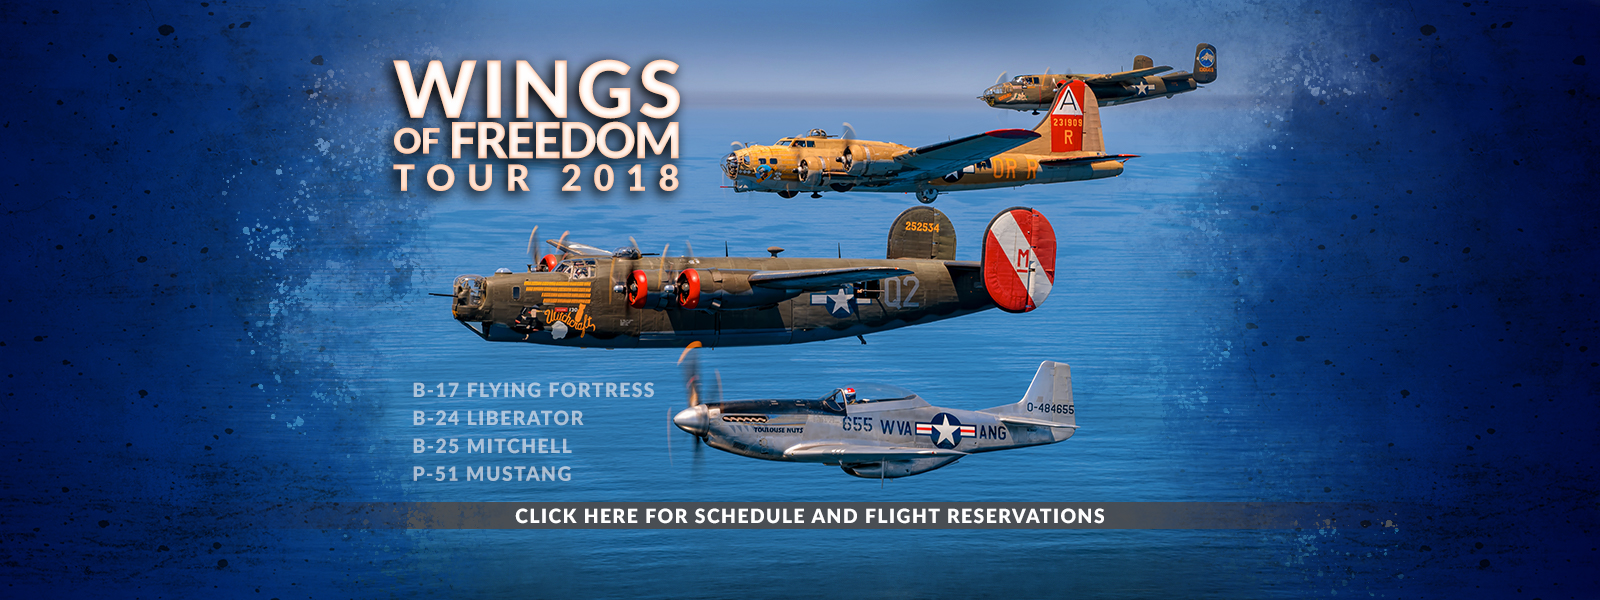 The Collings Foundation - Preserving Living Aviation History